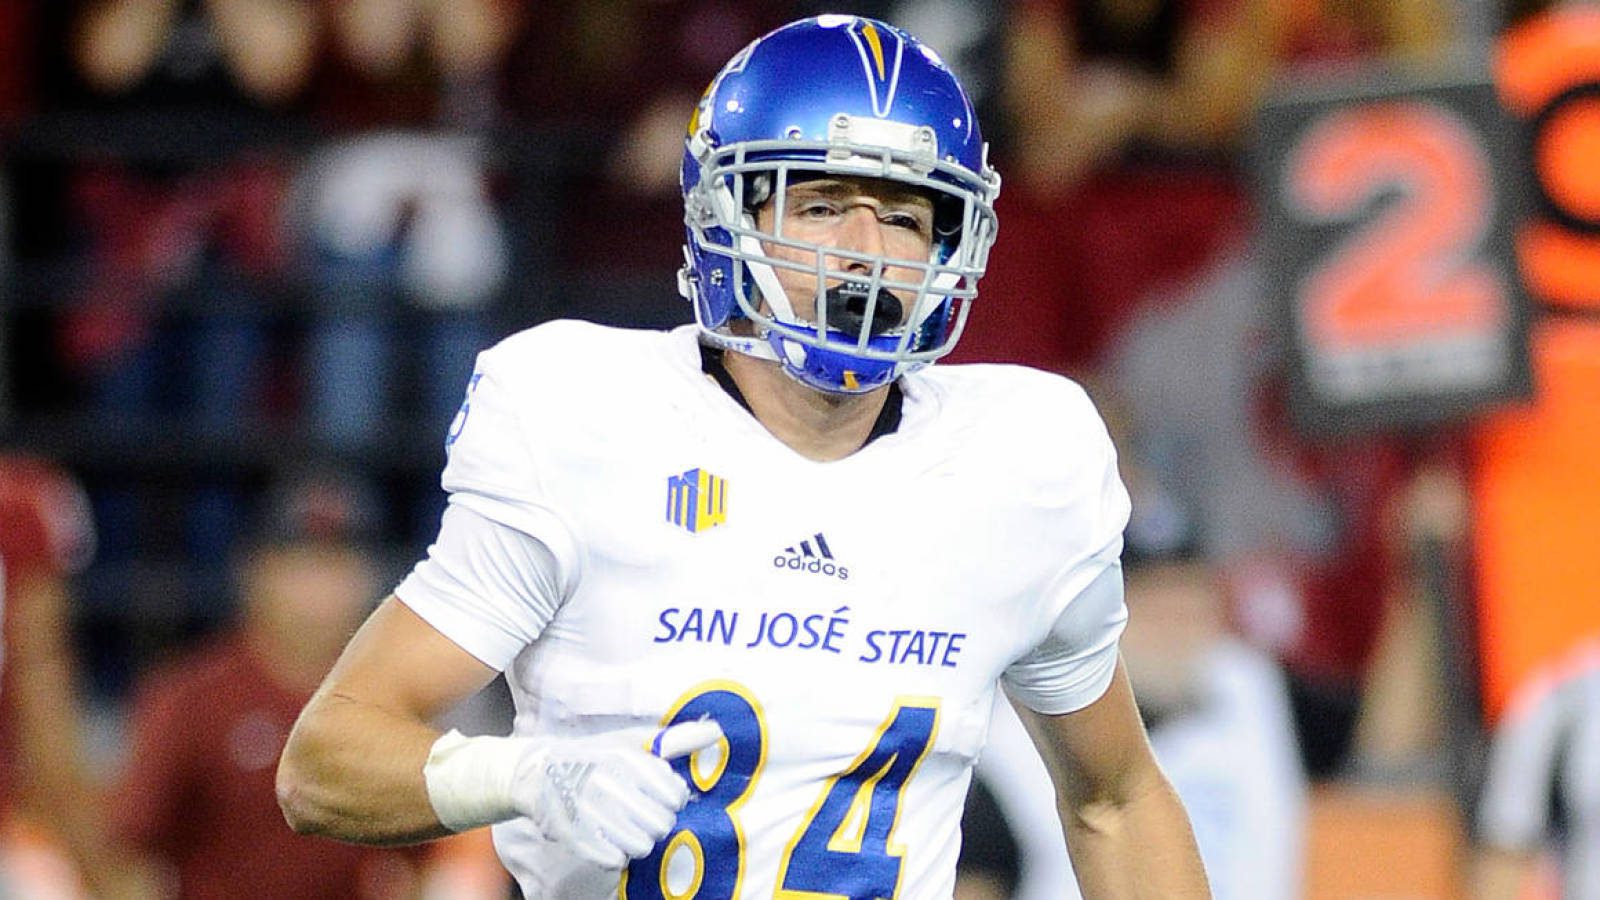 Bailey Gaither San Jose State NFL Draft Prospect Interview